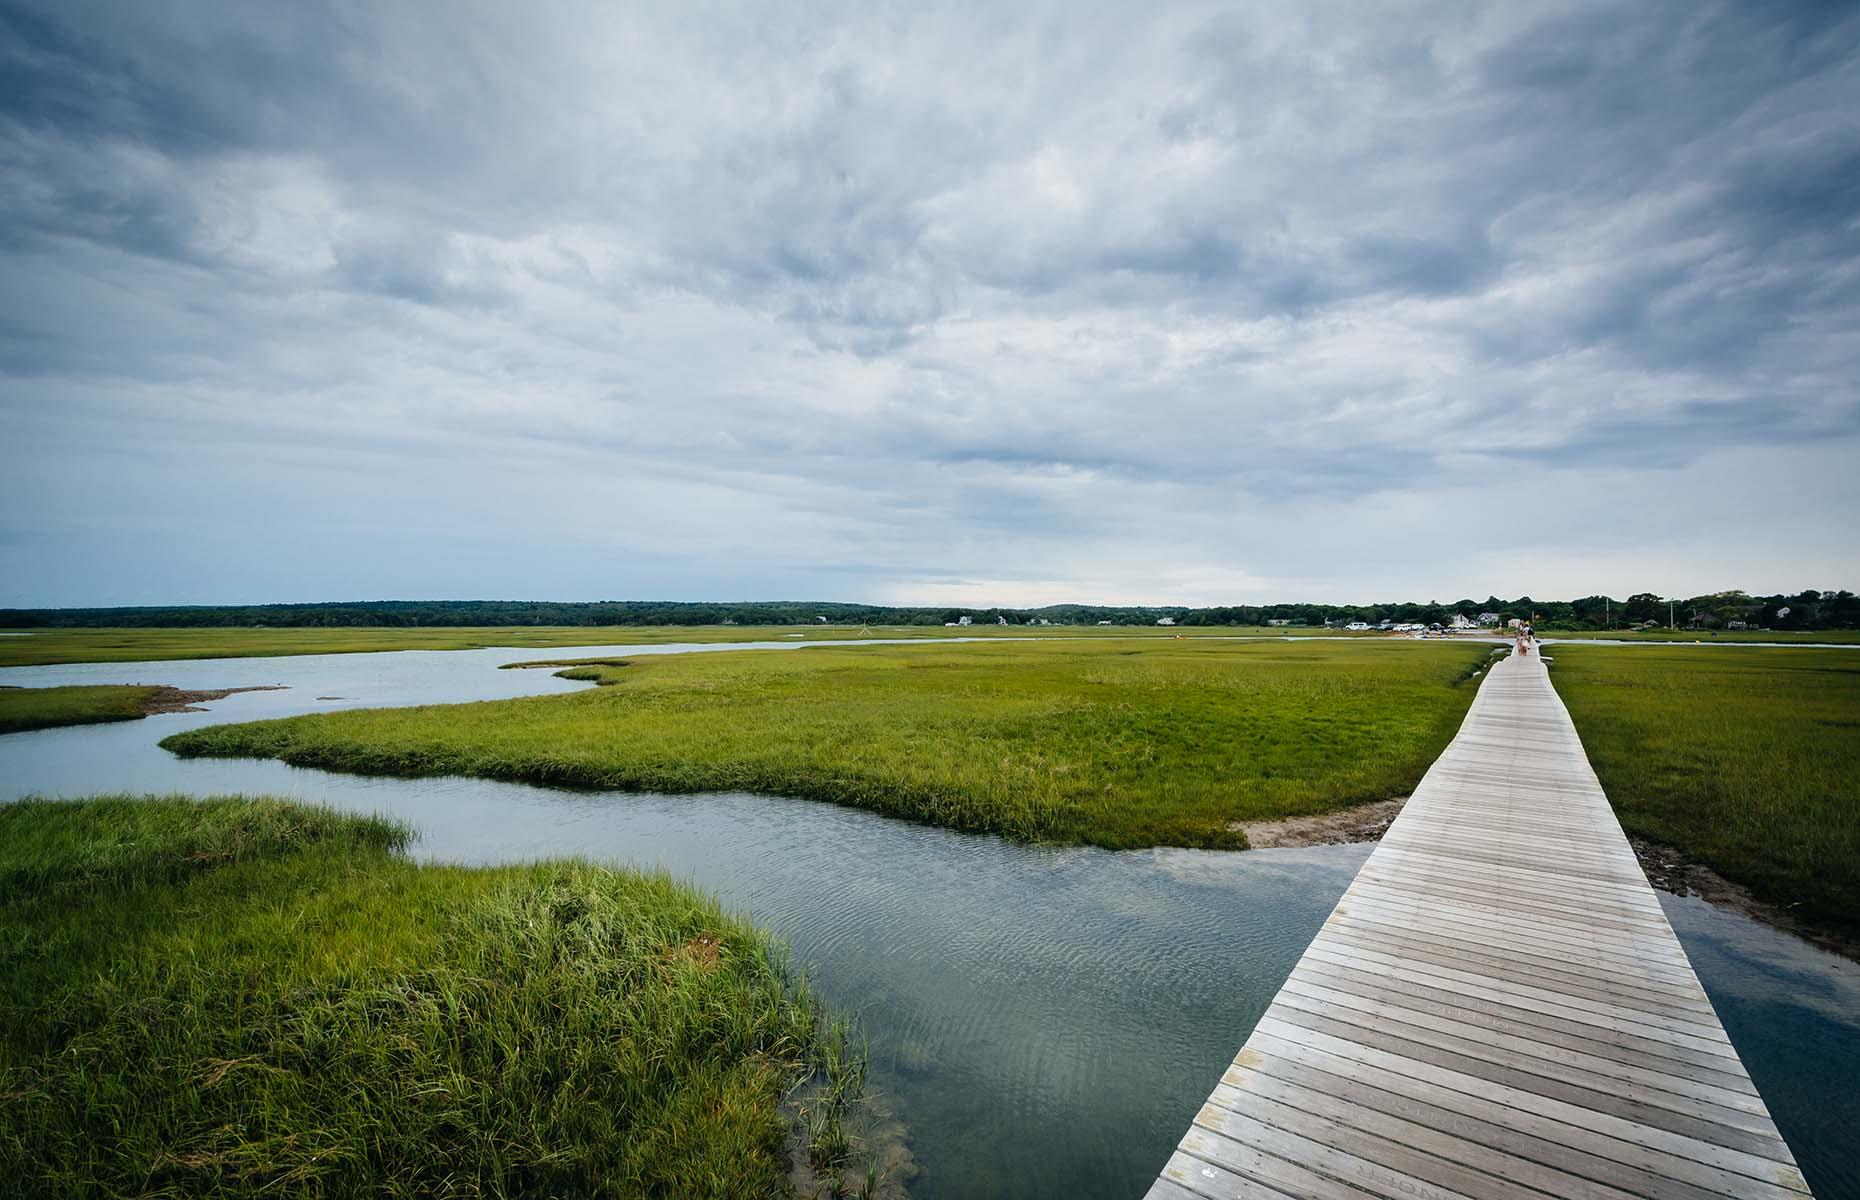 <p><a href="https://capecodroute6a.com/">Old King's Highway</a>, otherwise known as Route 6A, showcases the best of what Cape Cod has to offer. Skimming for 63 miles (101km) by Cape Cod Bay and passing beaches, lighthouses and state parks, the route connects some of the most historic towns on this peninsula. Most travelers start in Sandwich, exploring the historic town center and boardwalk (pictured), then head east towards Barnstable, Yarmouth and Brewster. The route ends in Orleans but many make their way further along the road to Provincetown at the tip of Cape Cod.</p>